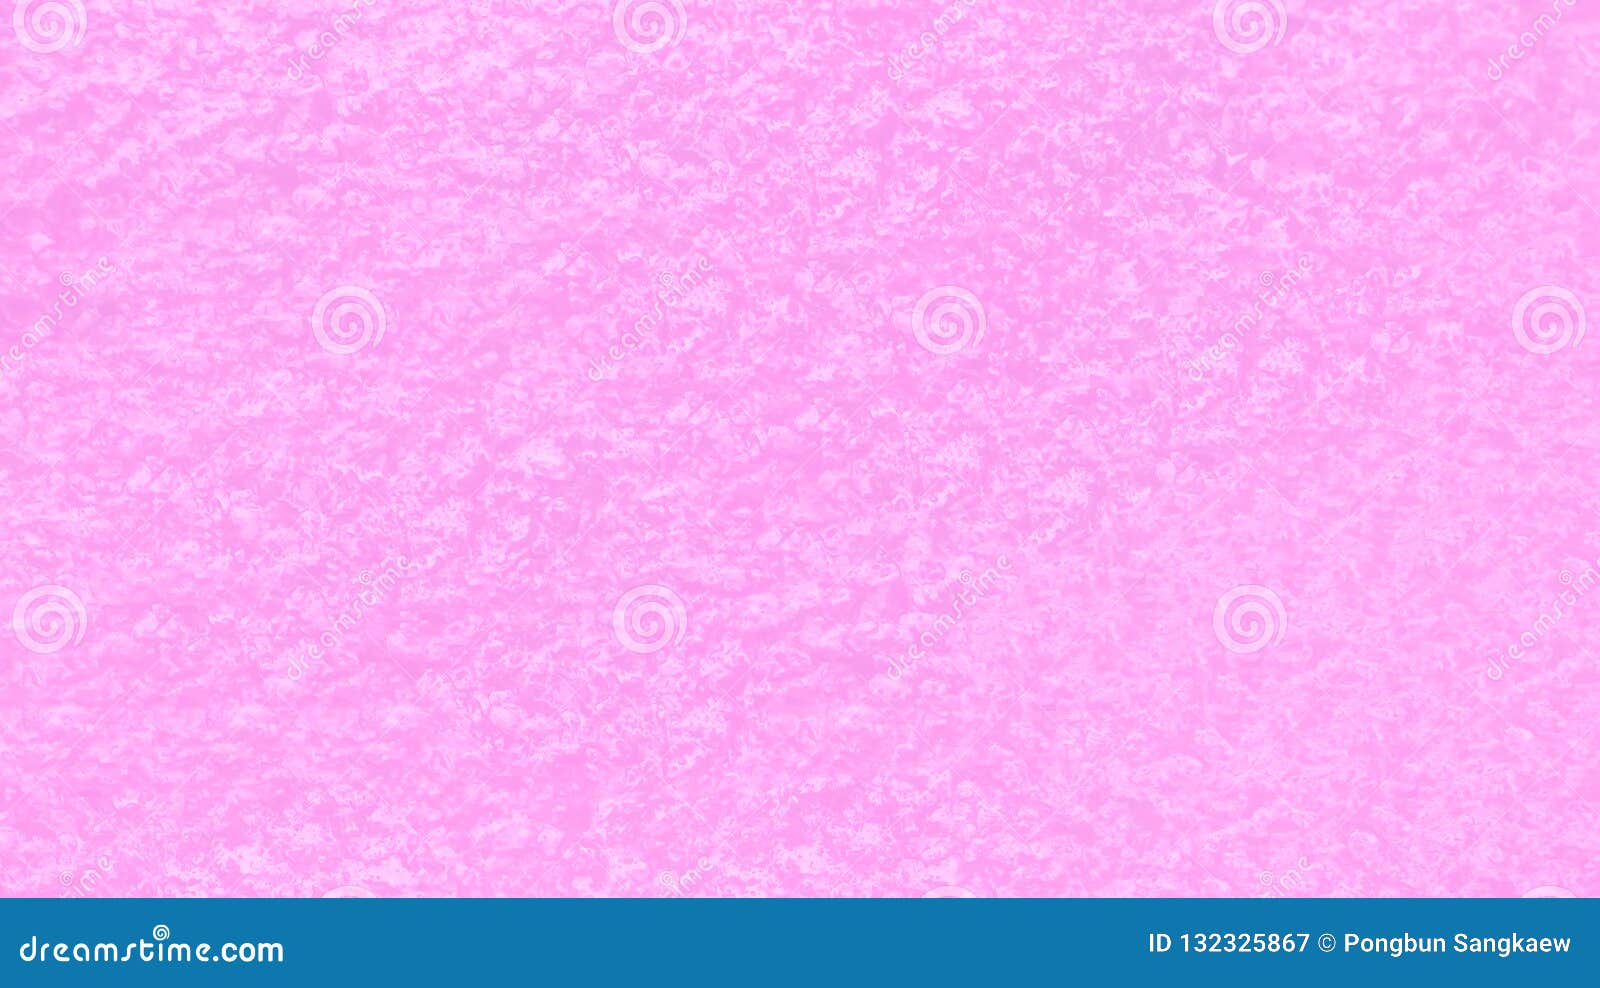 Grunge Pink ,purple Abstract Texture Background Stock Image - Image of ...